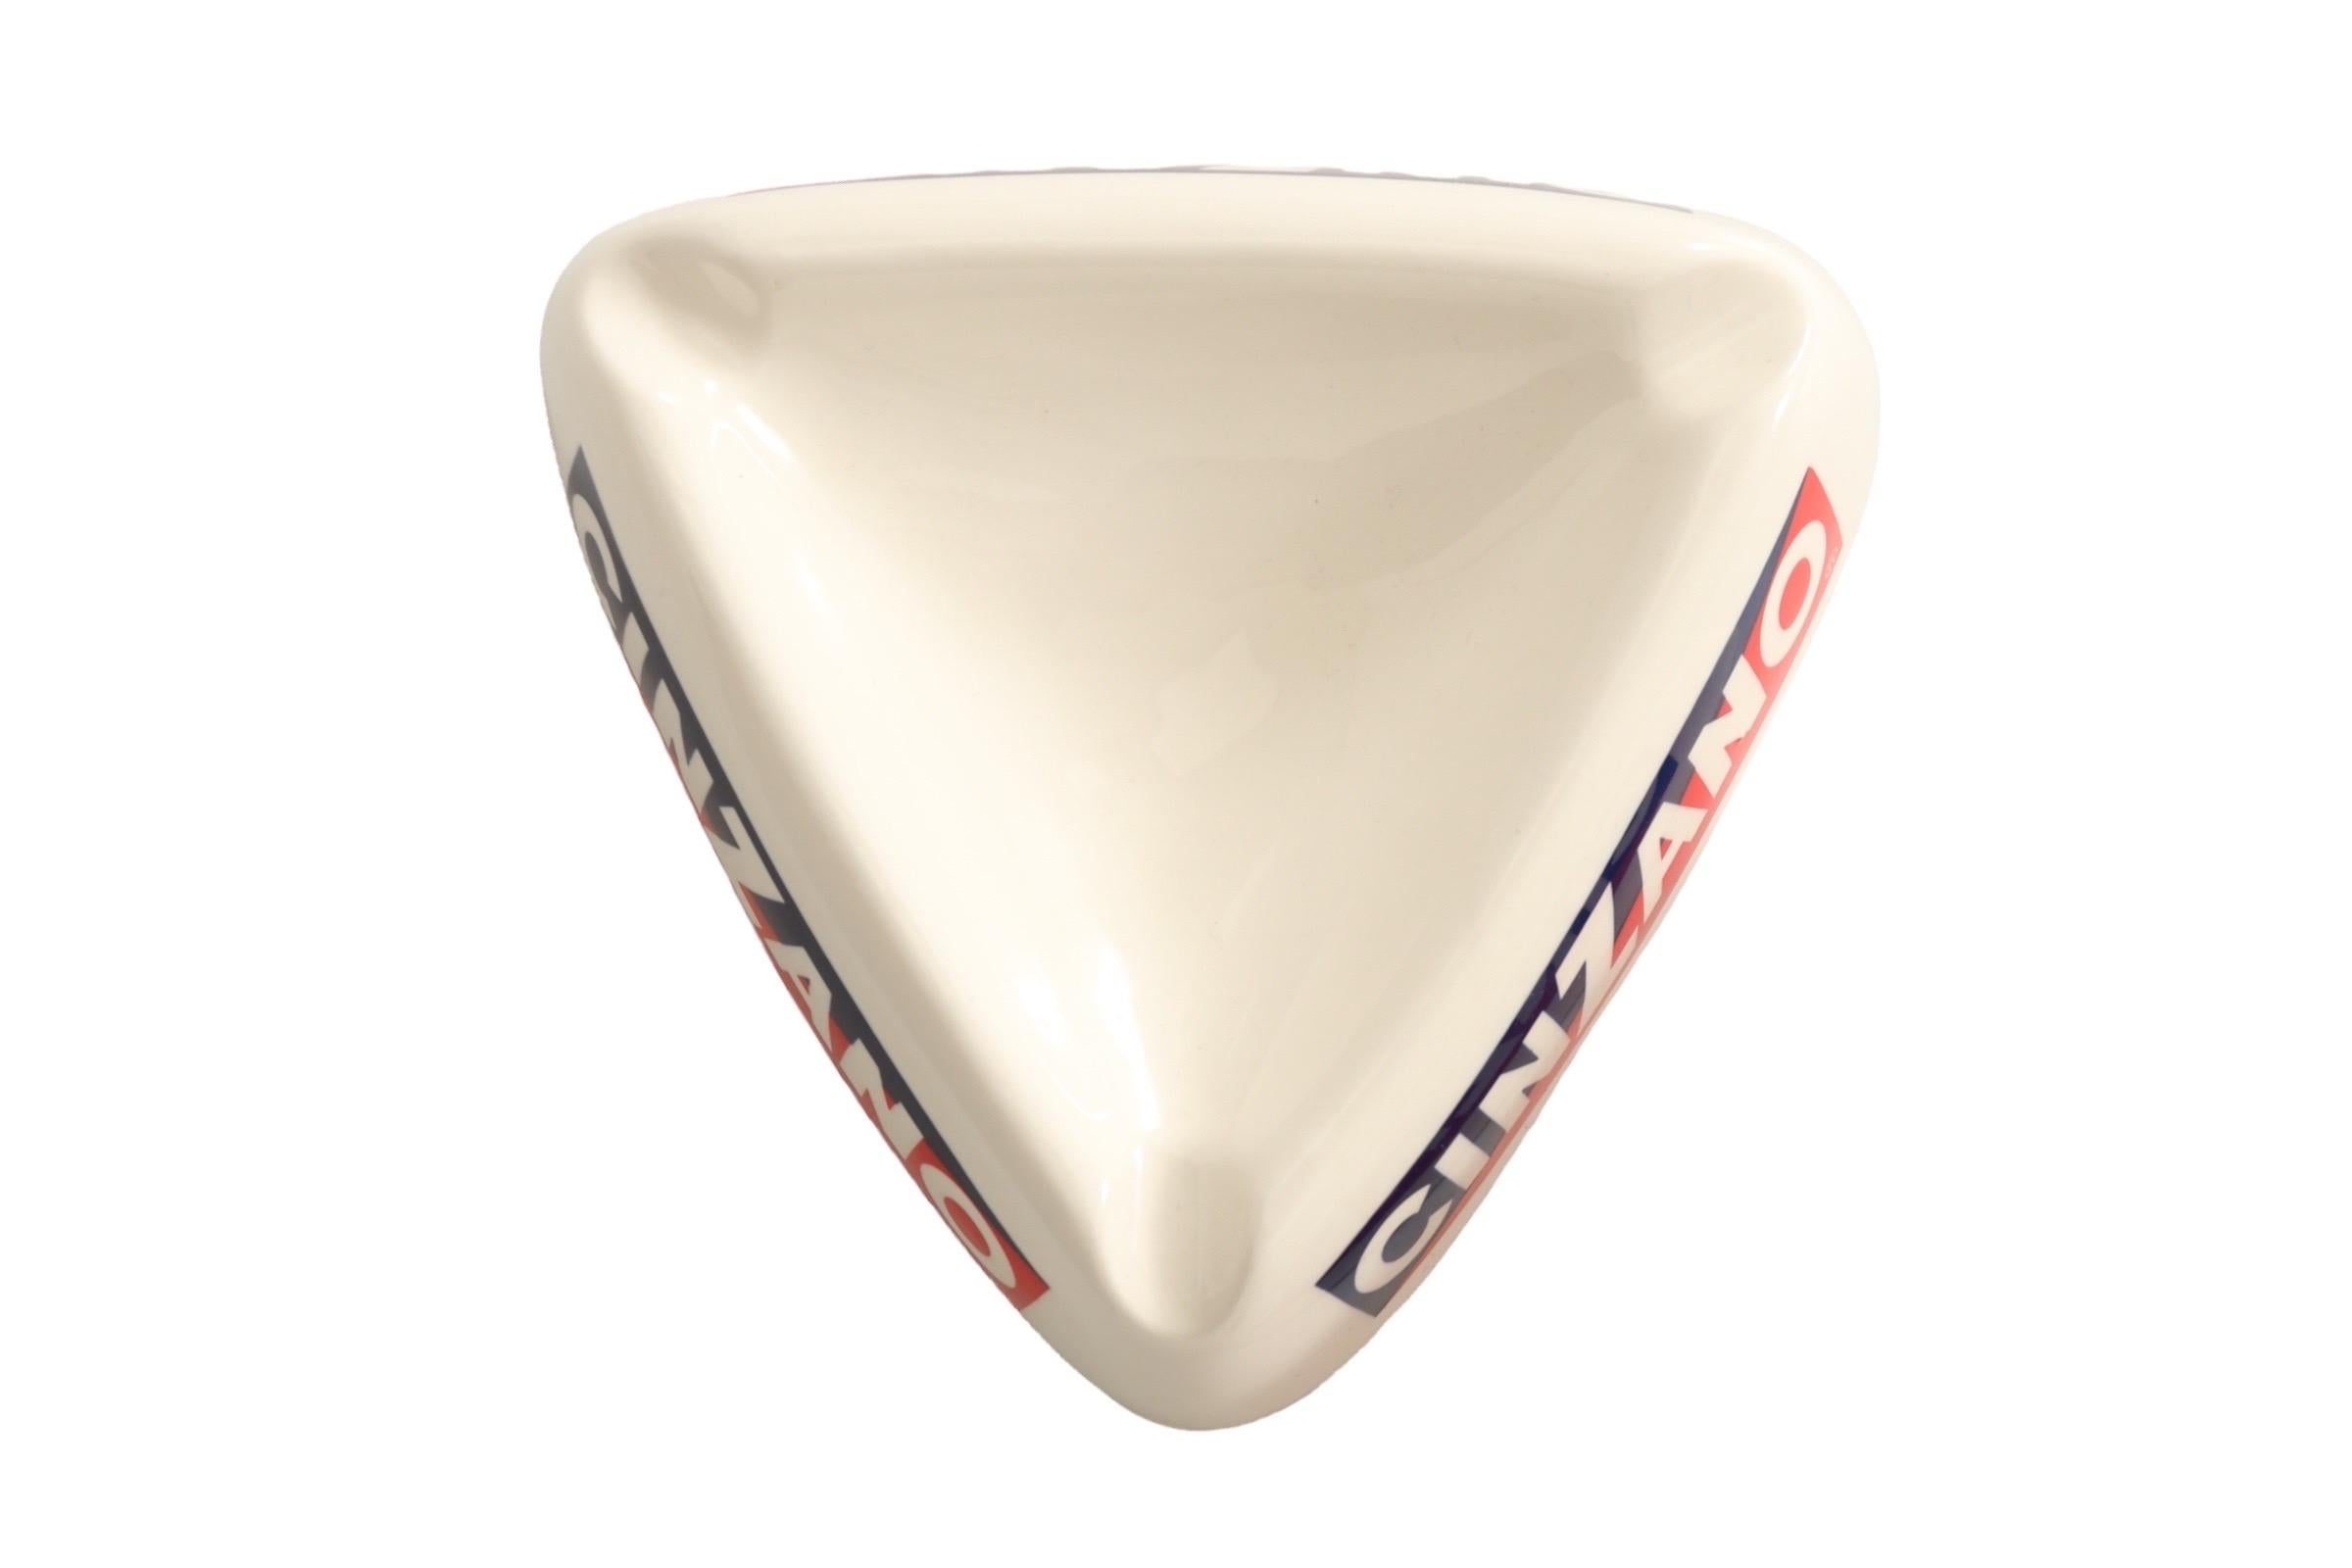 A triangular ceramic ashtray with the distinctive Cinzano logo in red, white and blue on all three sides, and a cigarette rest at each corner.
 